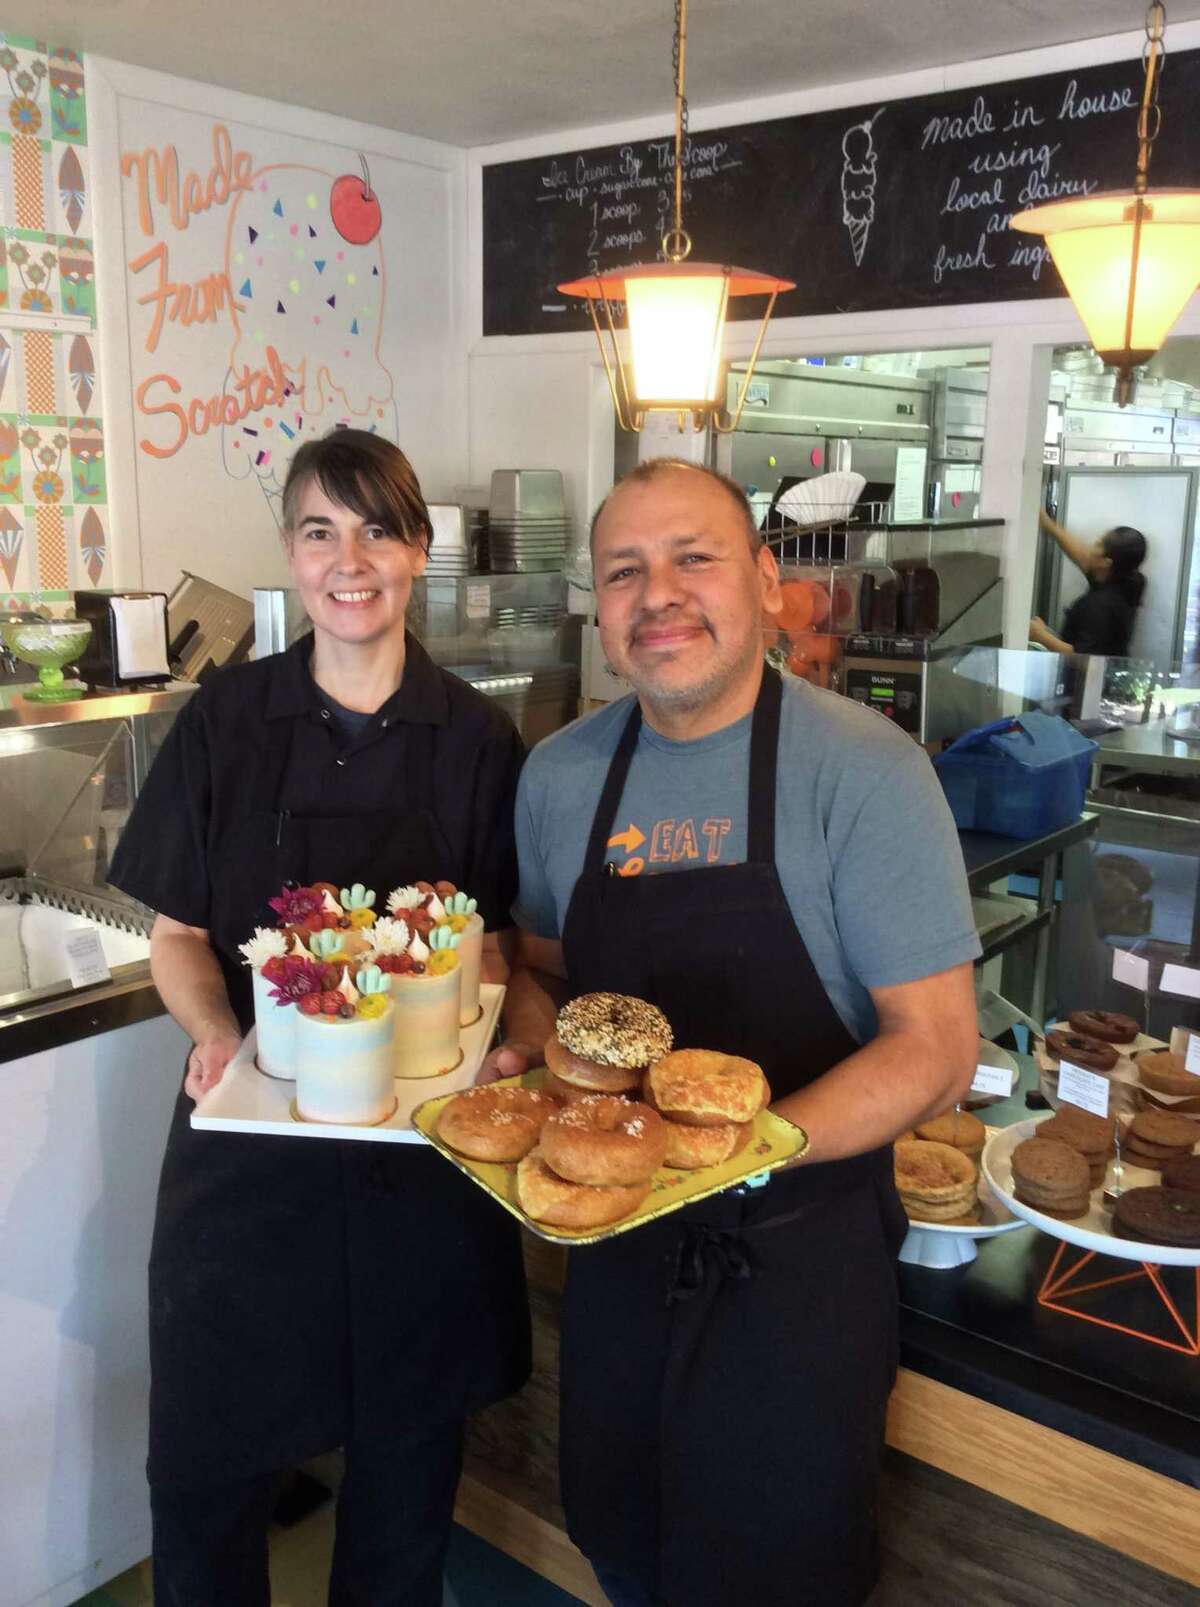 Husband and wife team, Sergio and Country Velator, have some signature items you need to try, all made in-house at New Wave Market and Super Chunk Sweets & Treats.